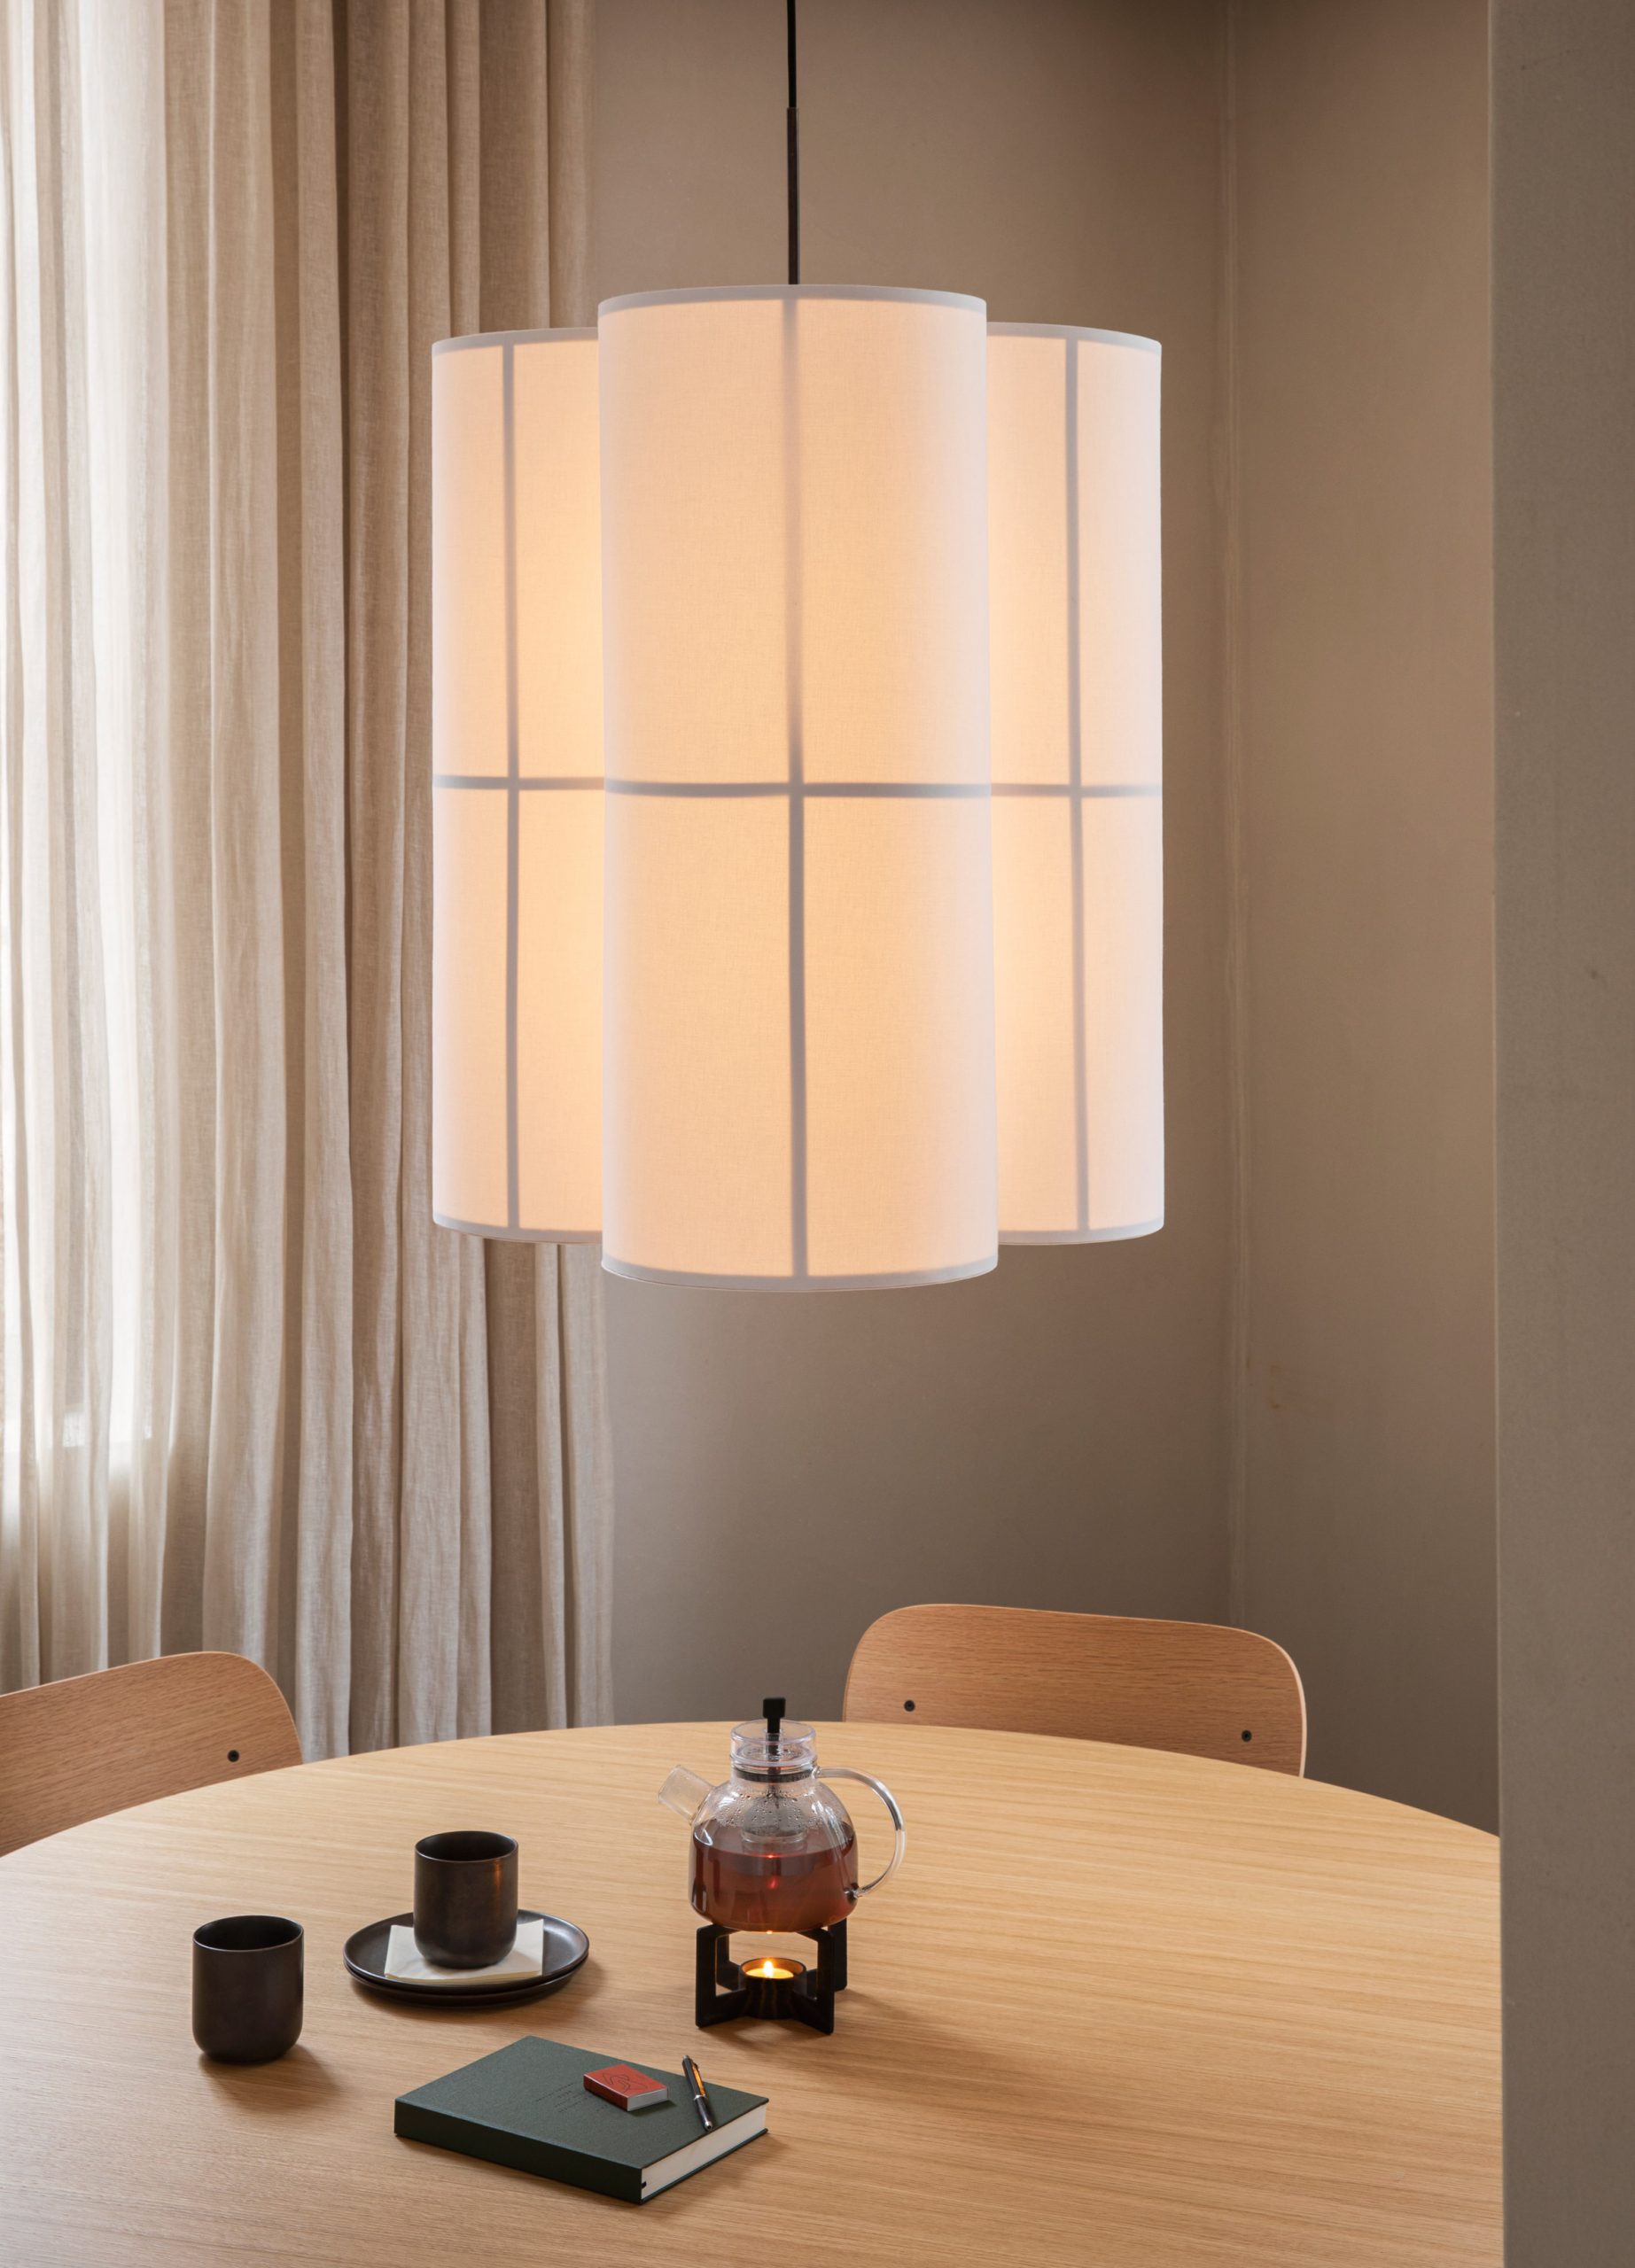 Hashira lanterns by Norm Architects for Menu